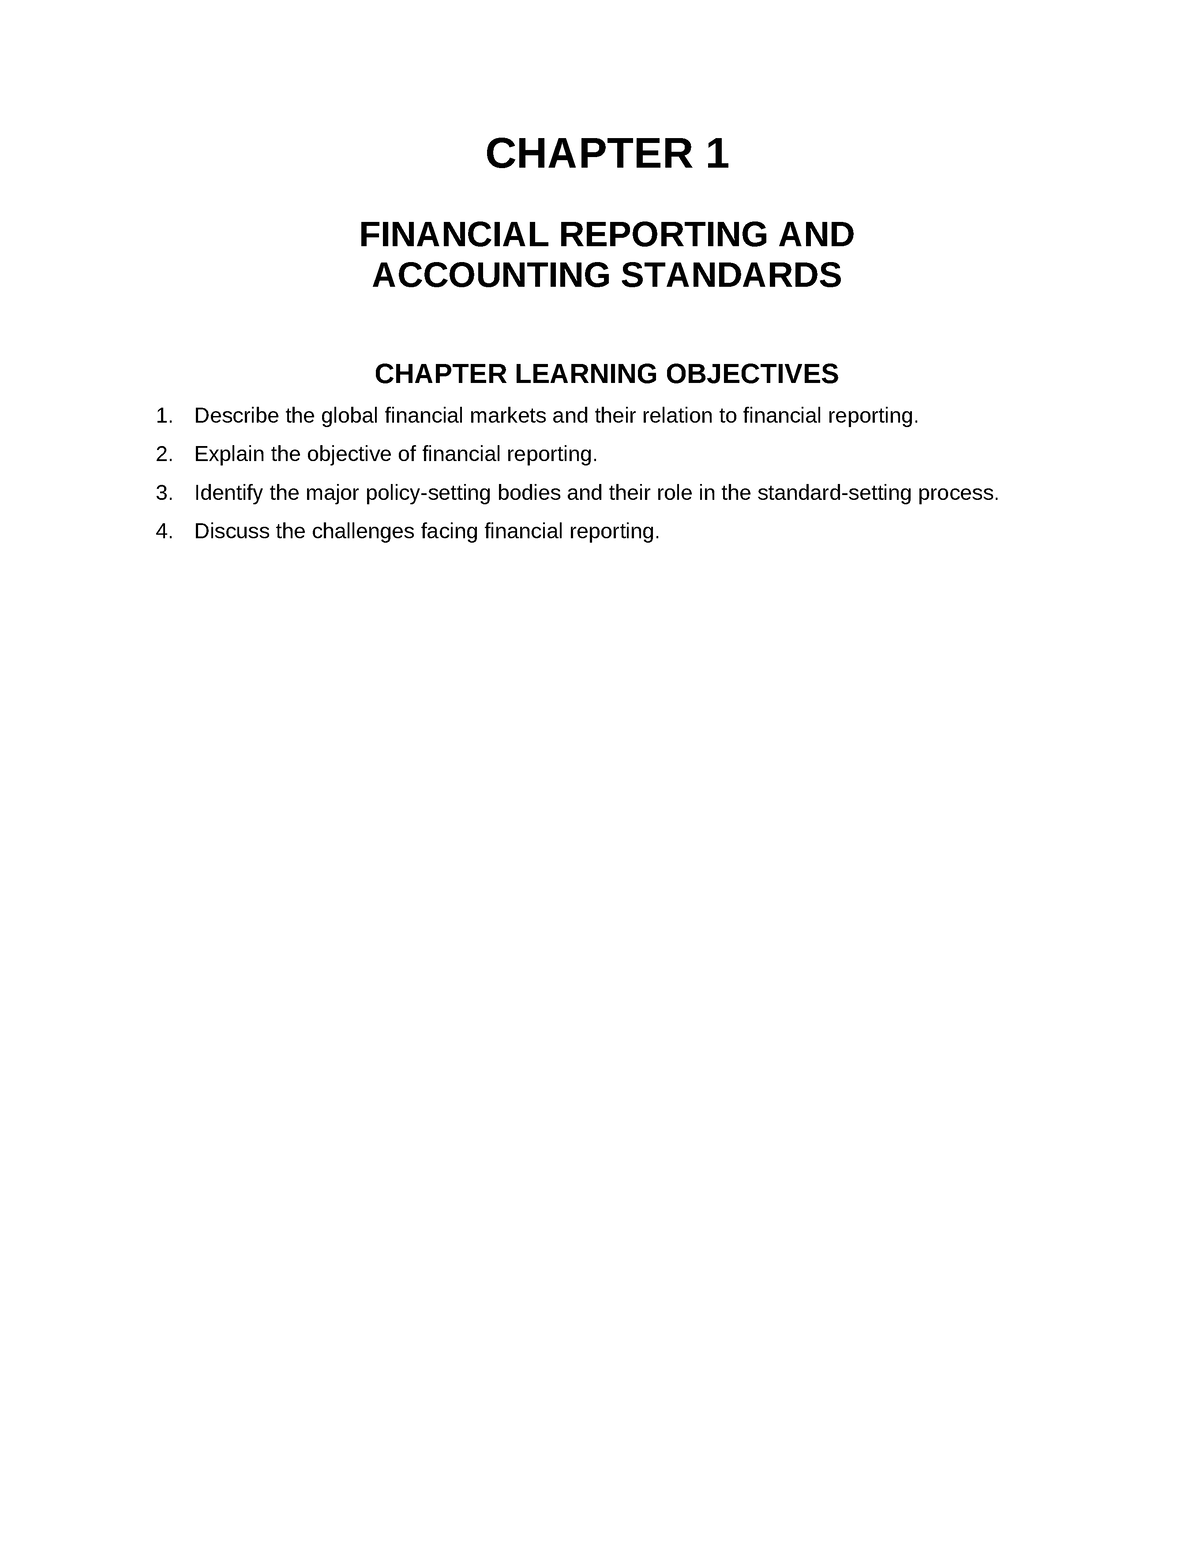 Kieso IFRS4 TB ch01 - CHAPTER 1 FINANCIAL REPORTING AND ACCOUNTING ...